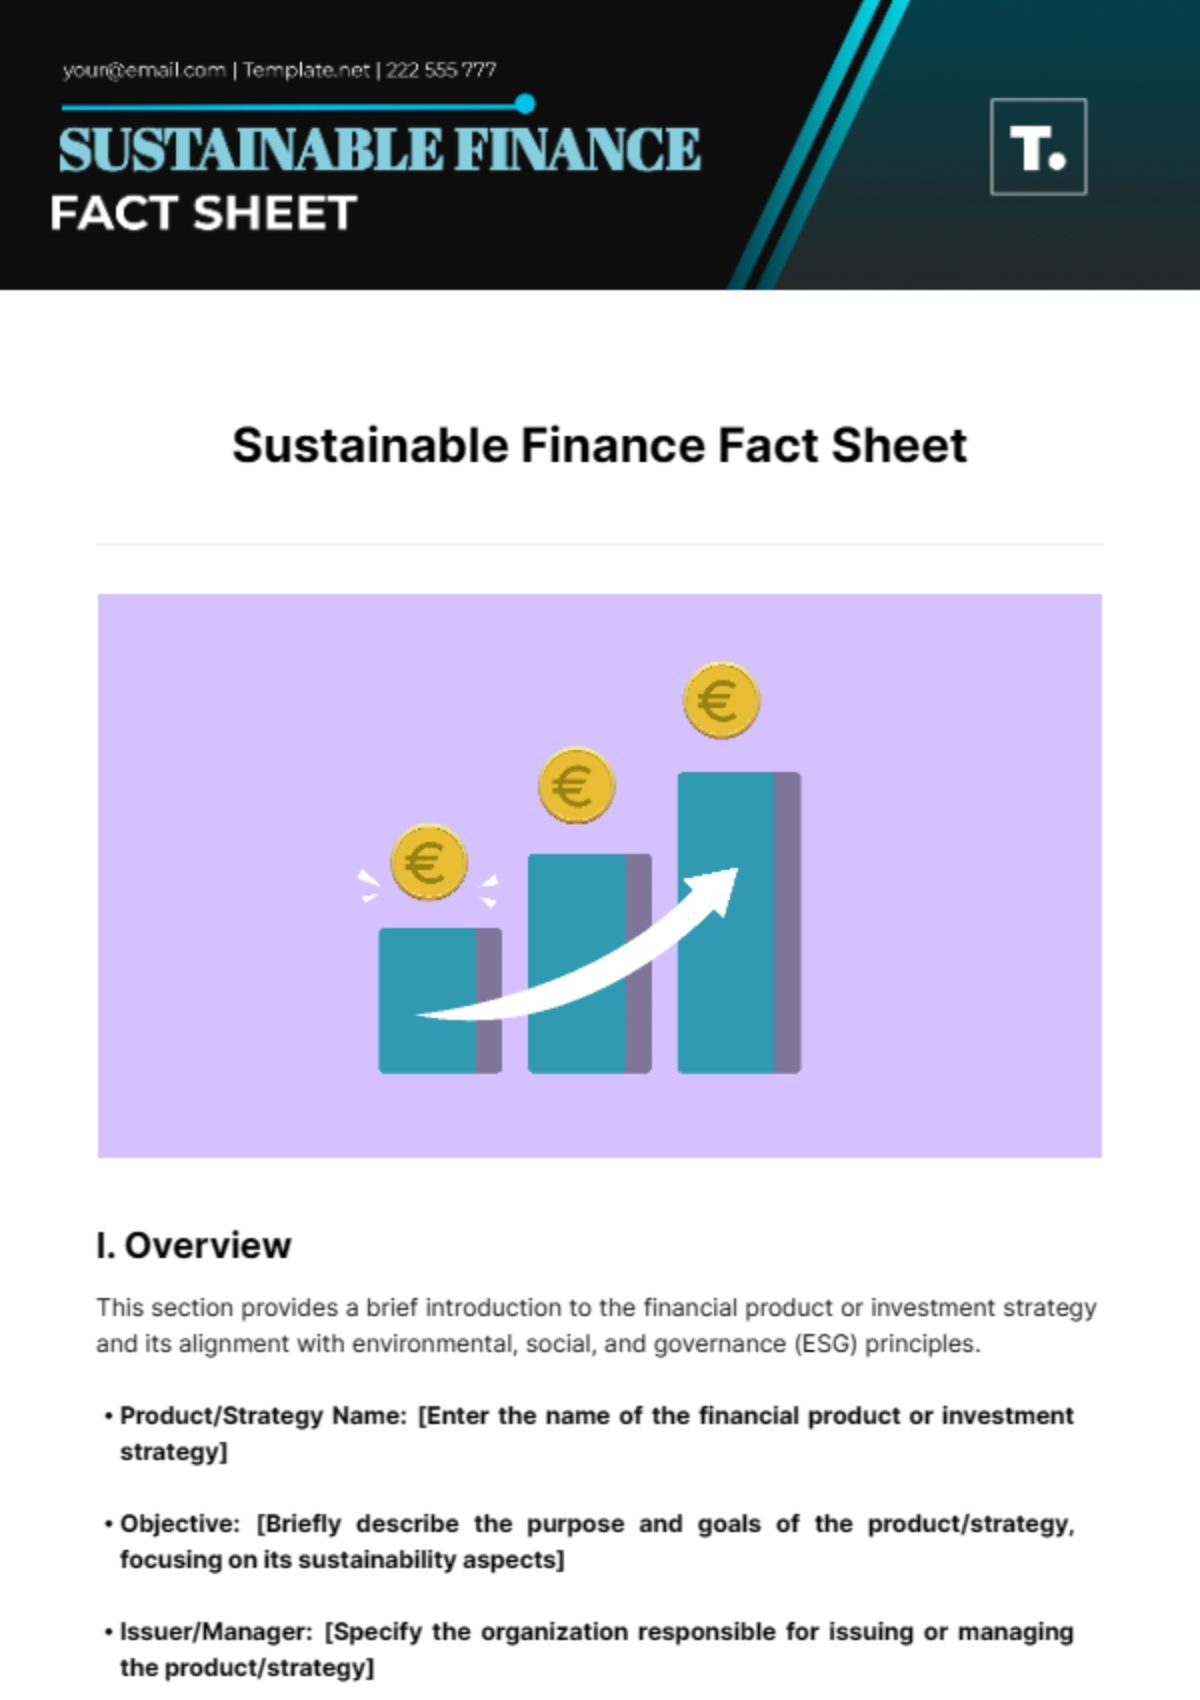 Sustainable Finance Fact Sheet Template